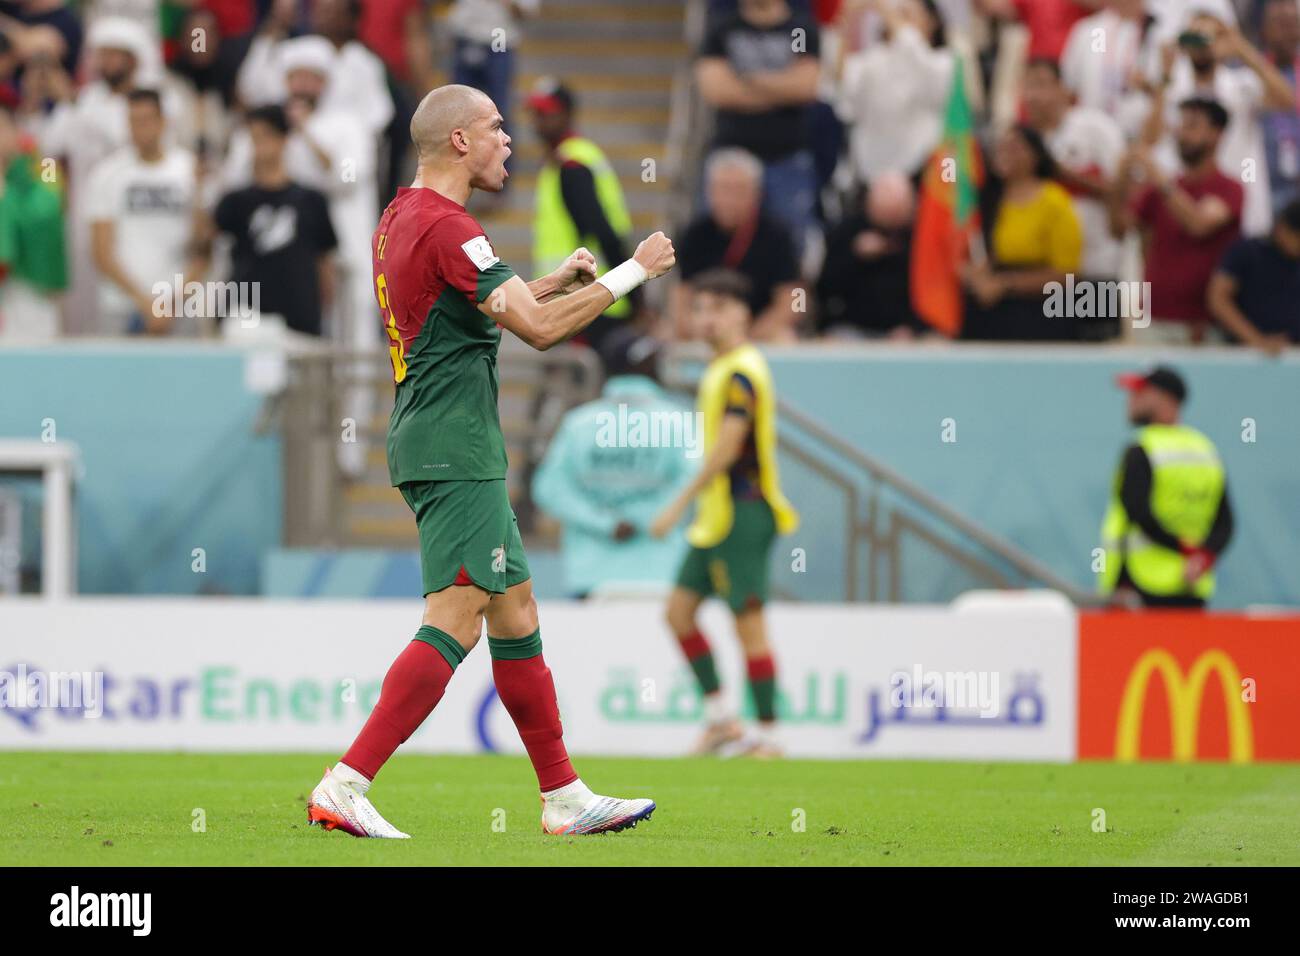 Képler Laveran Lima Ferreira (Pepe) of Portugal celebrates a goal during the FIFA World Cup Qatar 2022 match between Portugal and Switzerland at Lusail Stadium. Final score: Portugal 6:1 Switzerland. Stock Photo